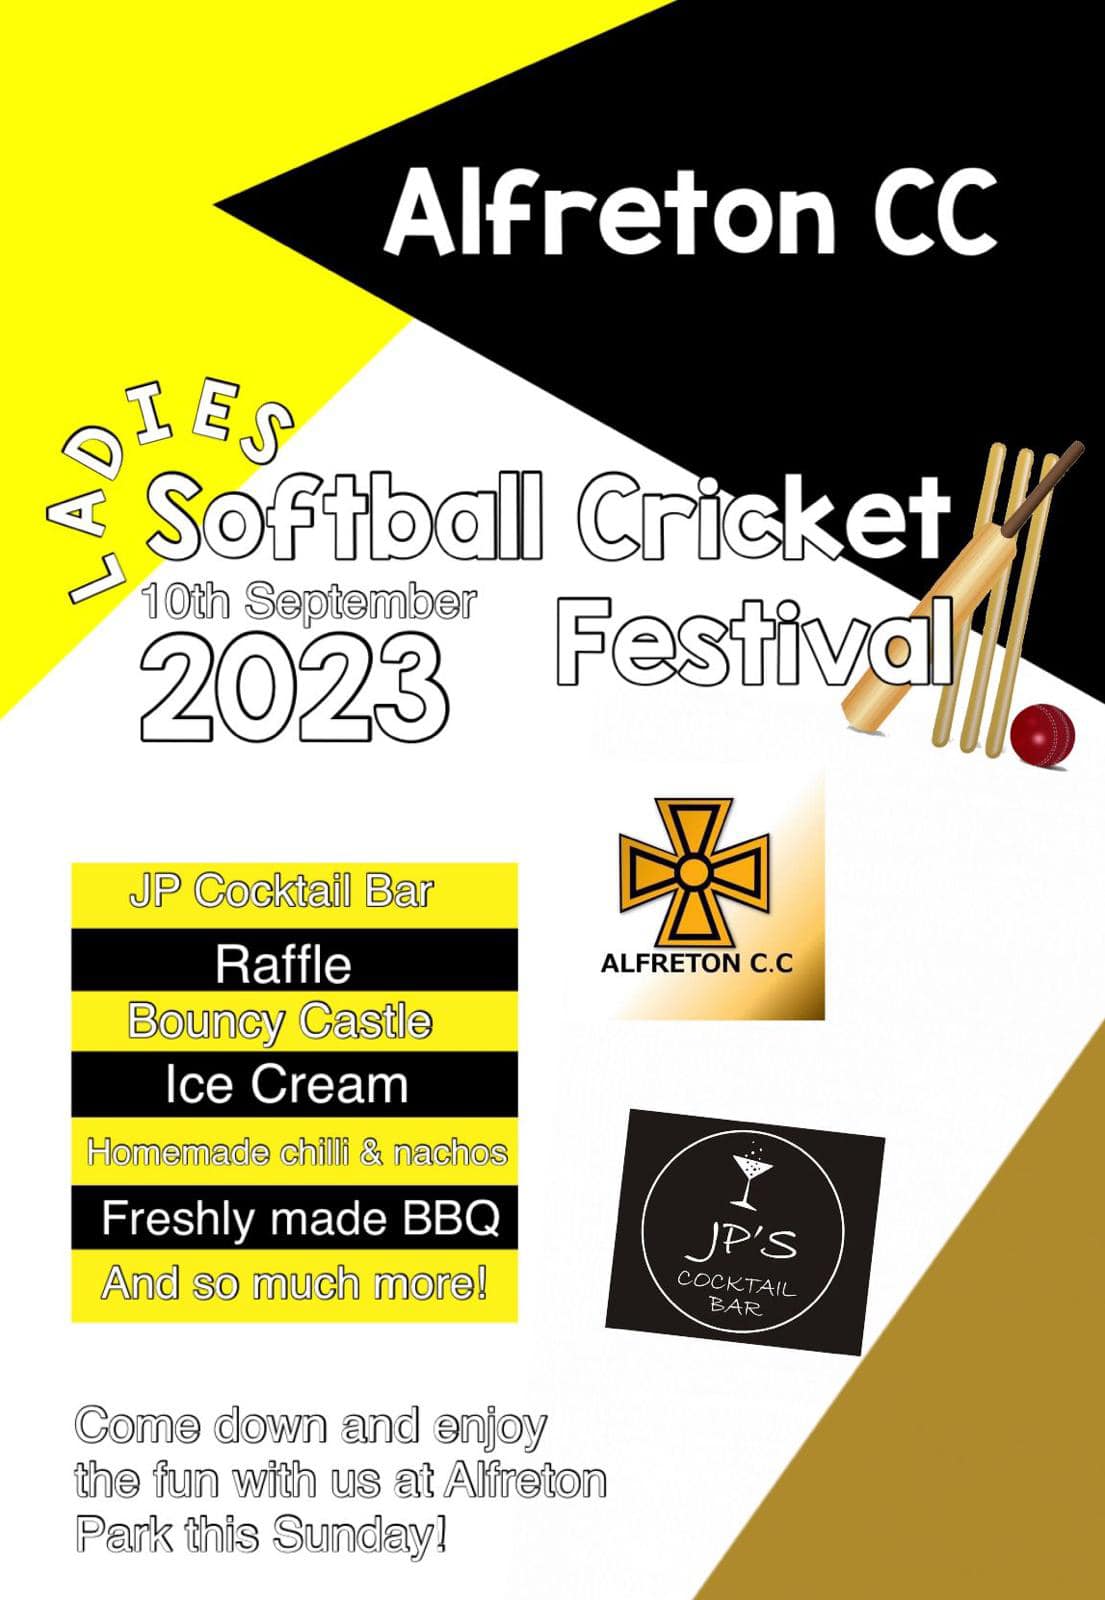 Alfreton Cricket Club unveils plans for its first ever women's softball festival